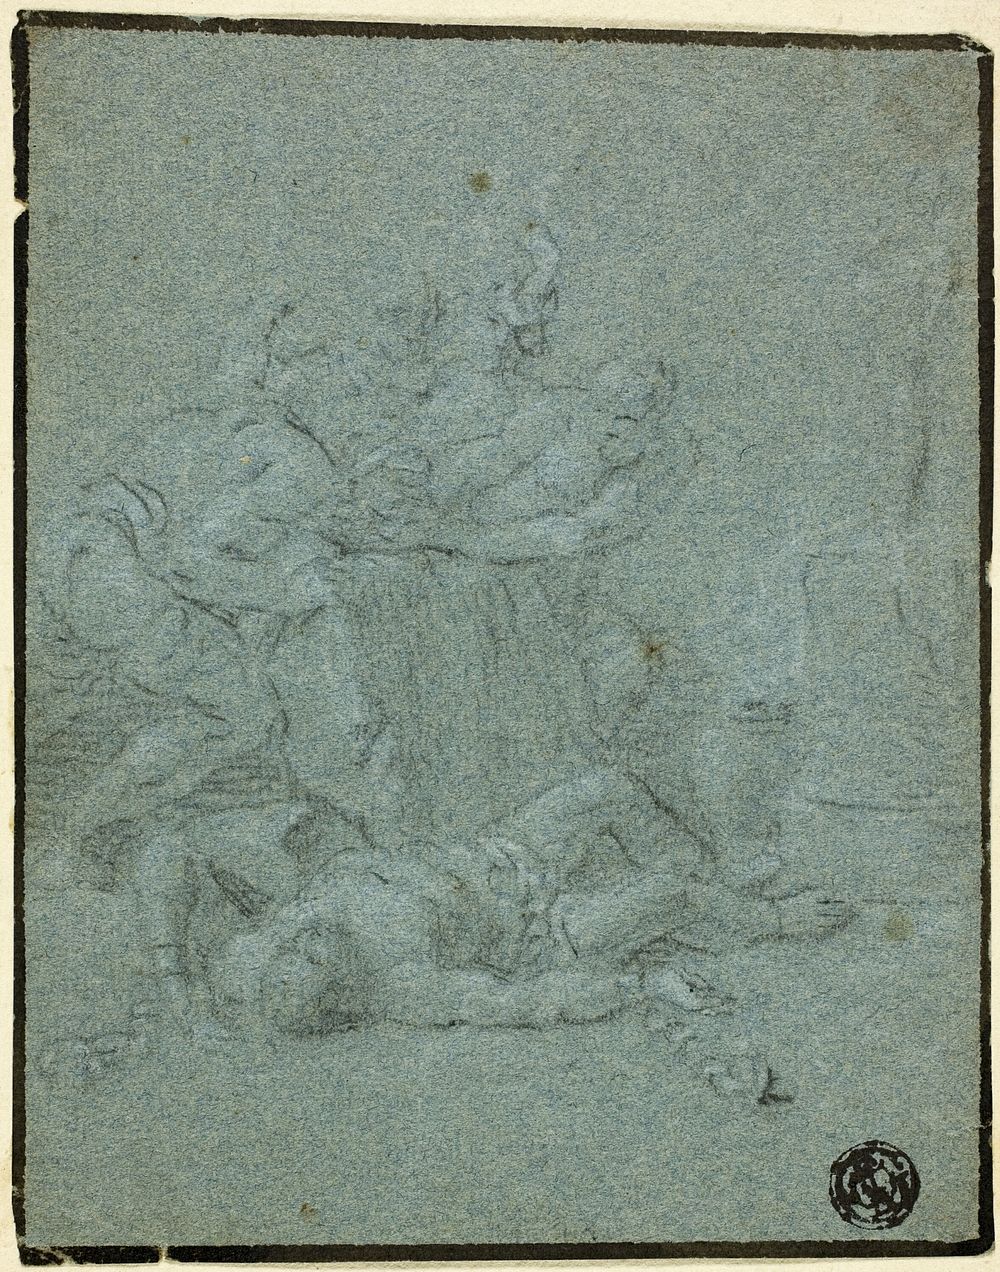 Two Men Holding Boulder over Prostrate Man with Manacles by Victor Honoré Janssens